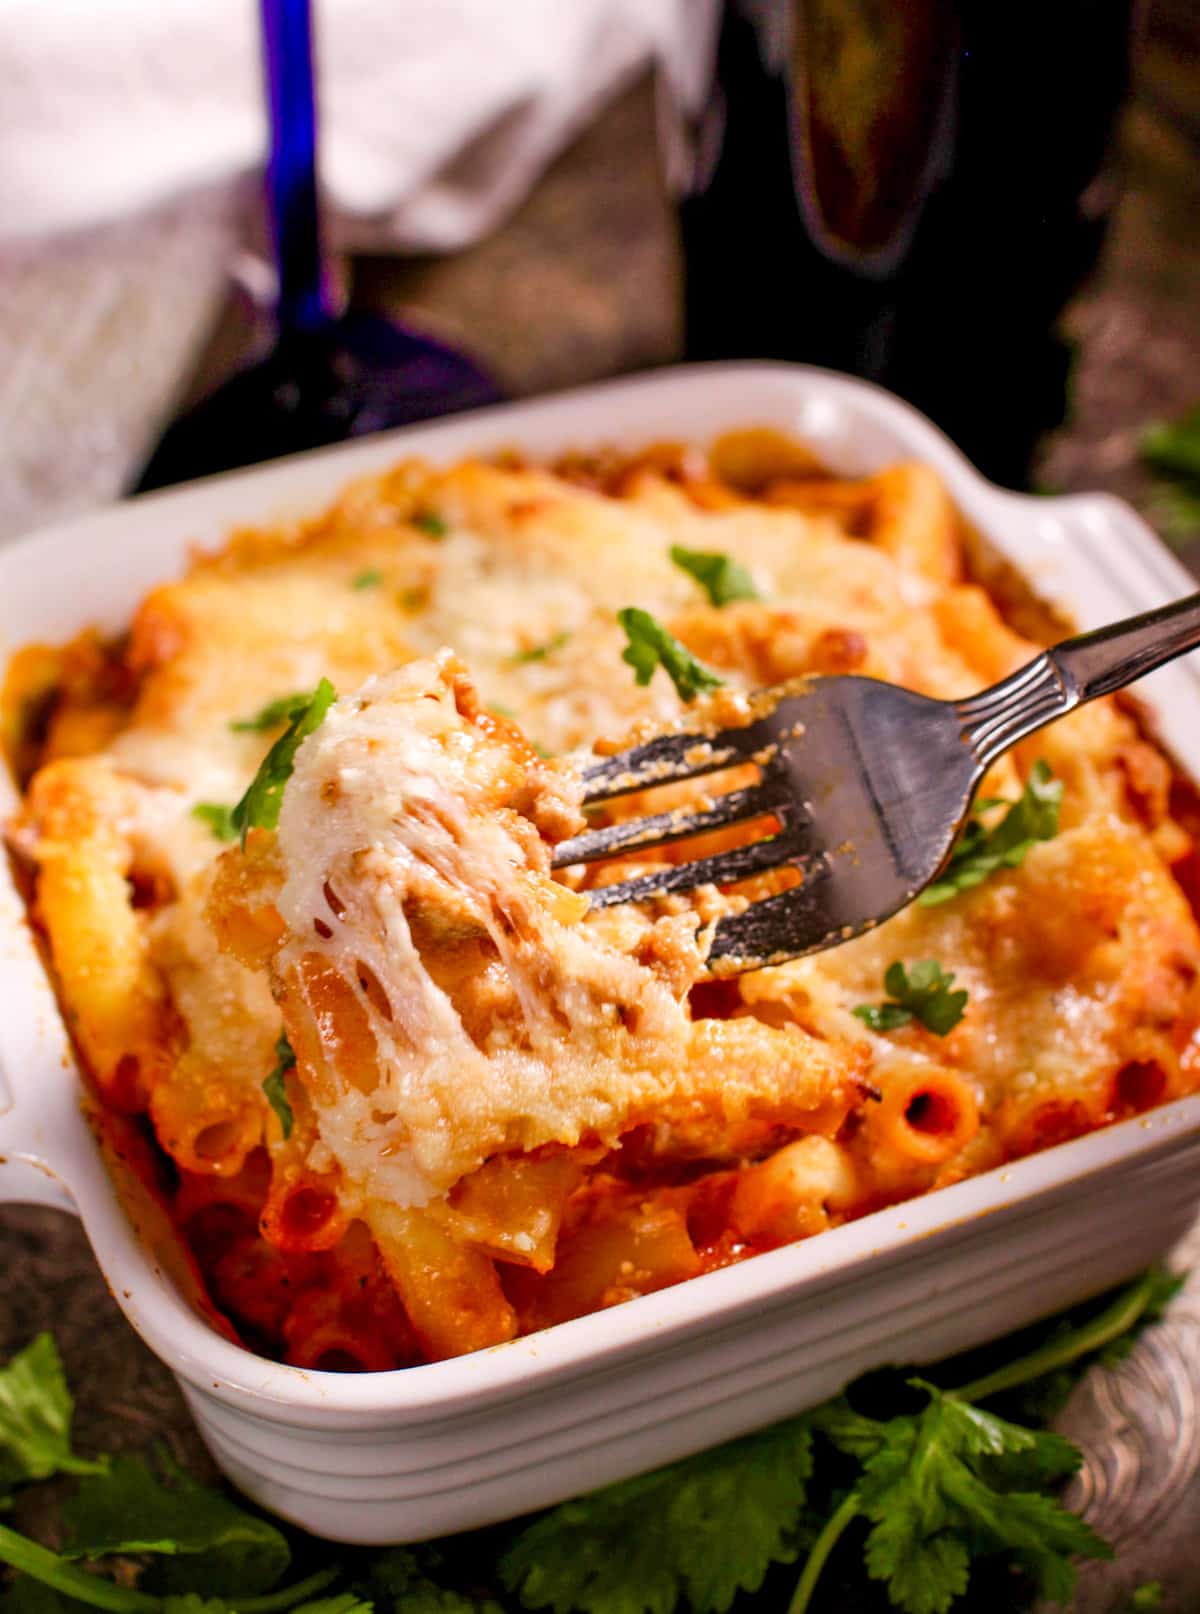 baked ziti in a small white baking dish next to a glass of red wine